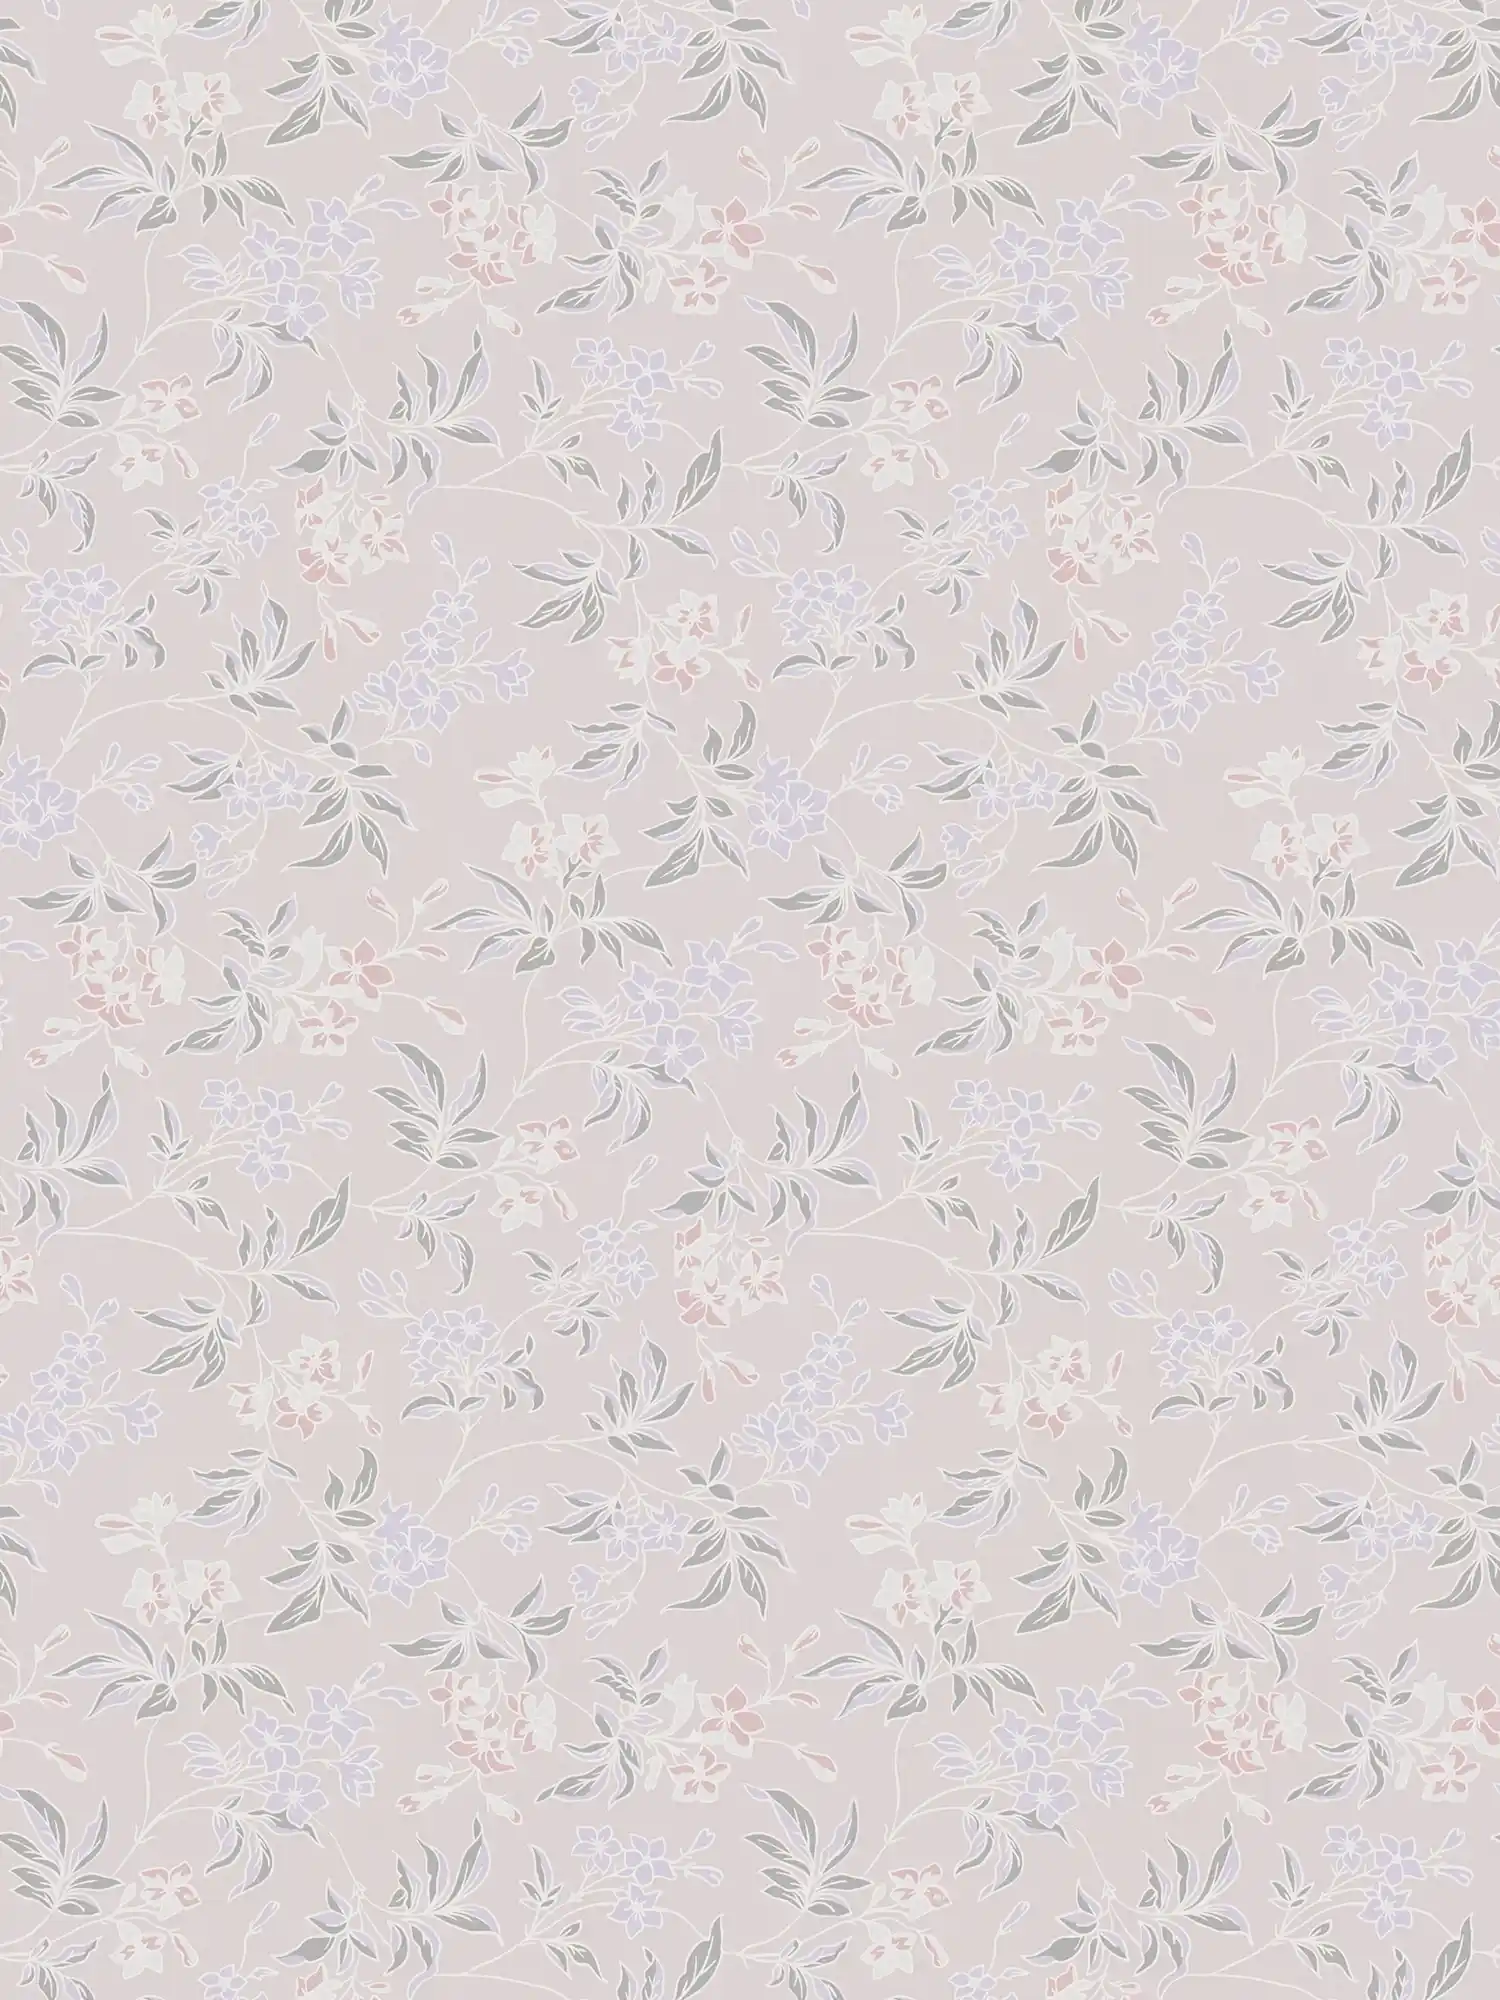 English style non-woven wallpaper with floral pattern - cream, pink, purple
